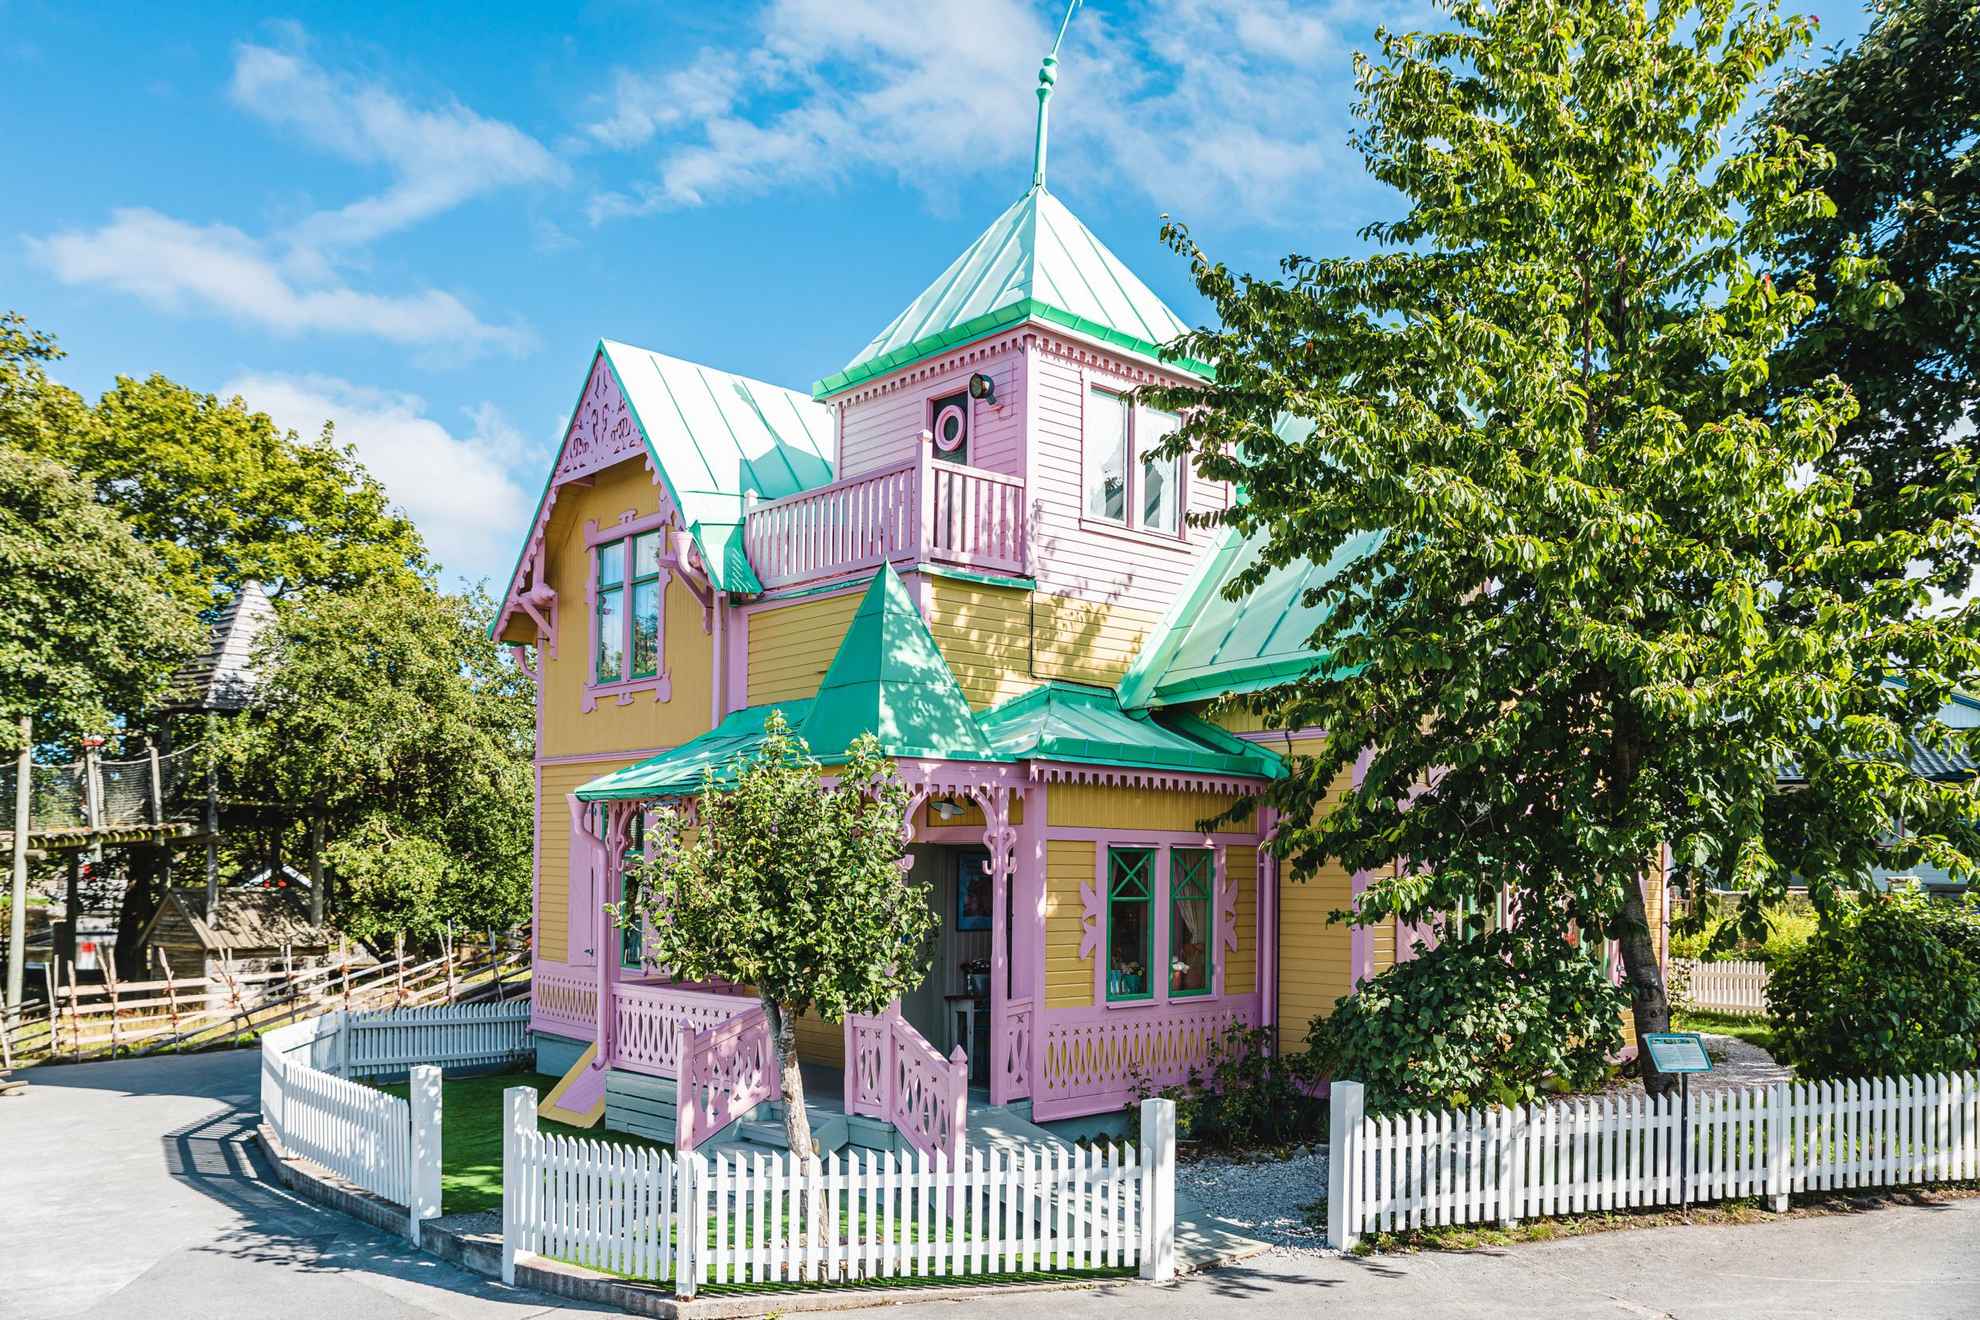 A yellow wooden house with pink trims based of the book from Pippi Longstocking.